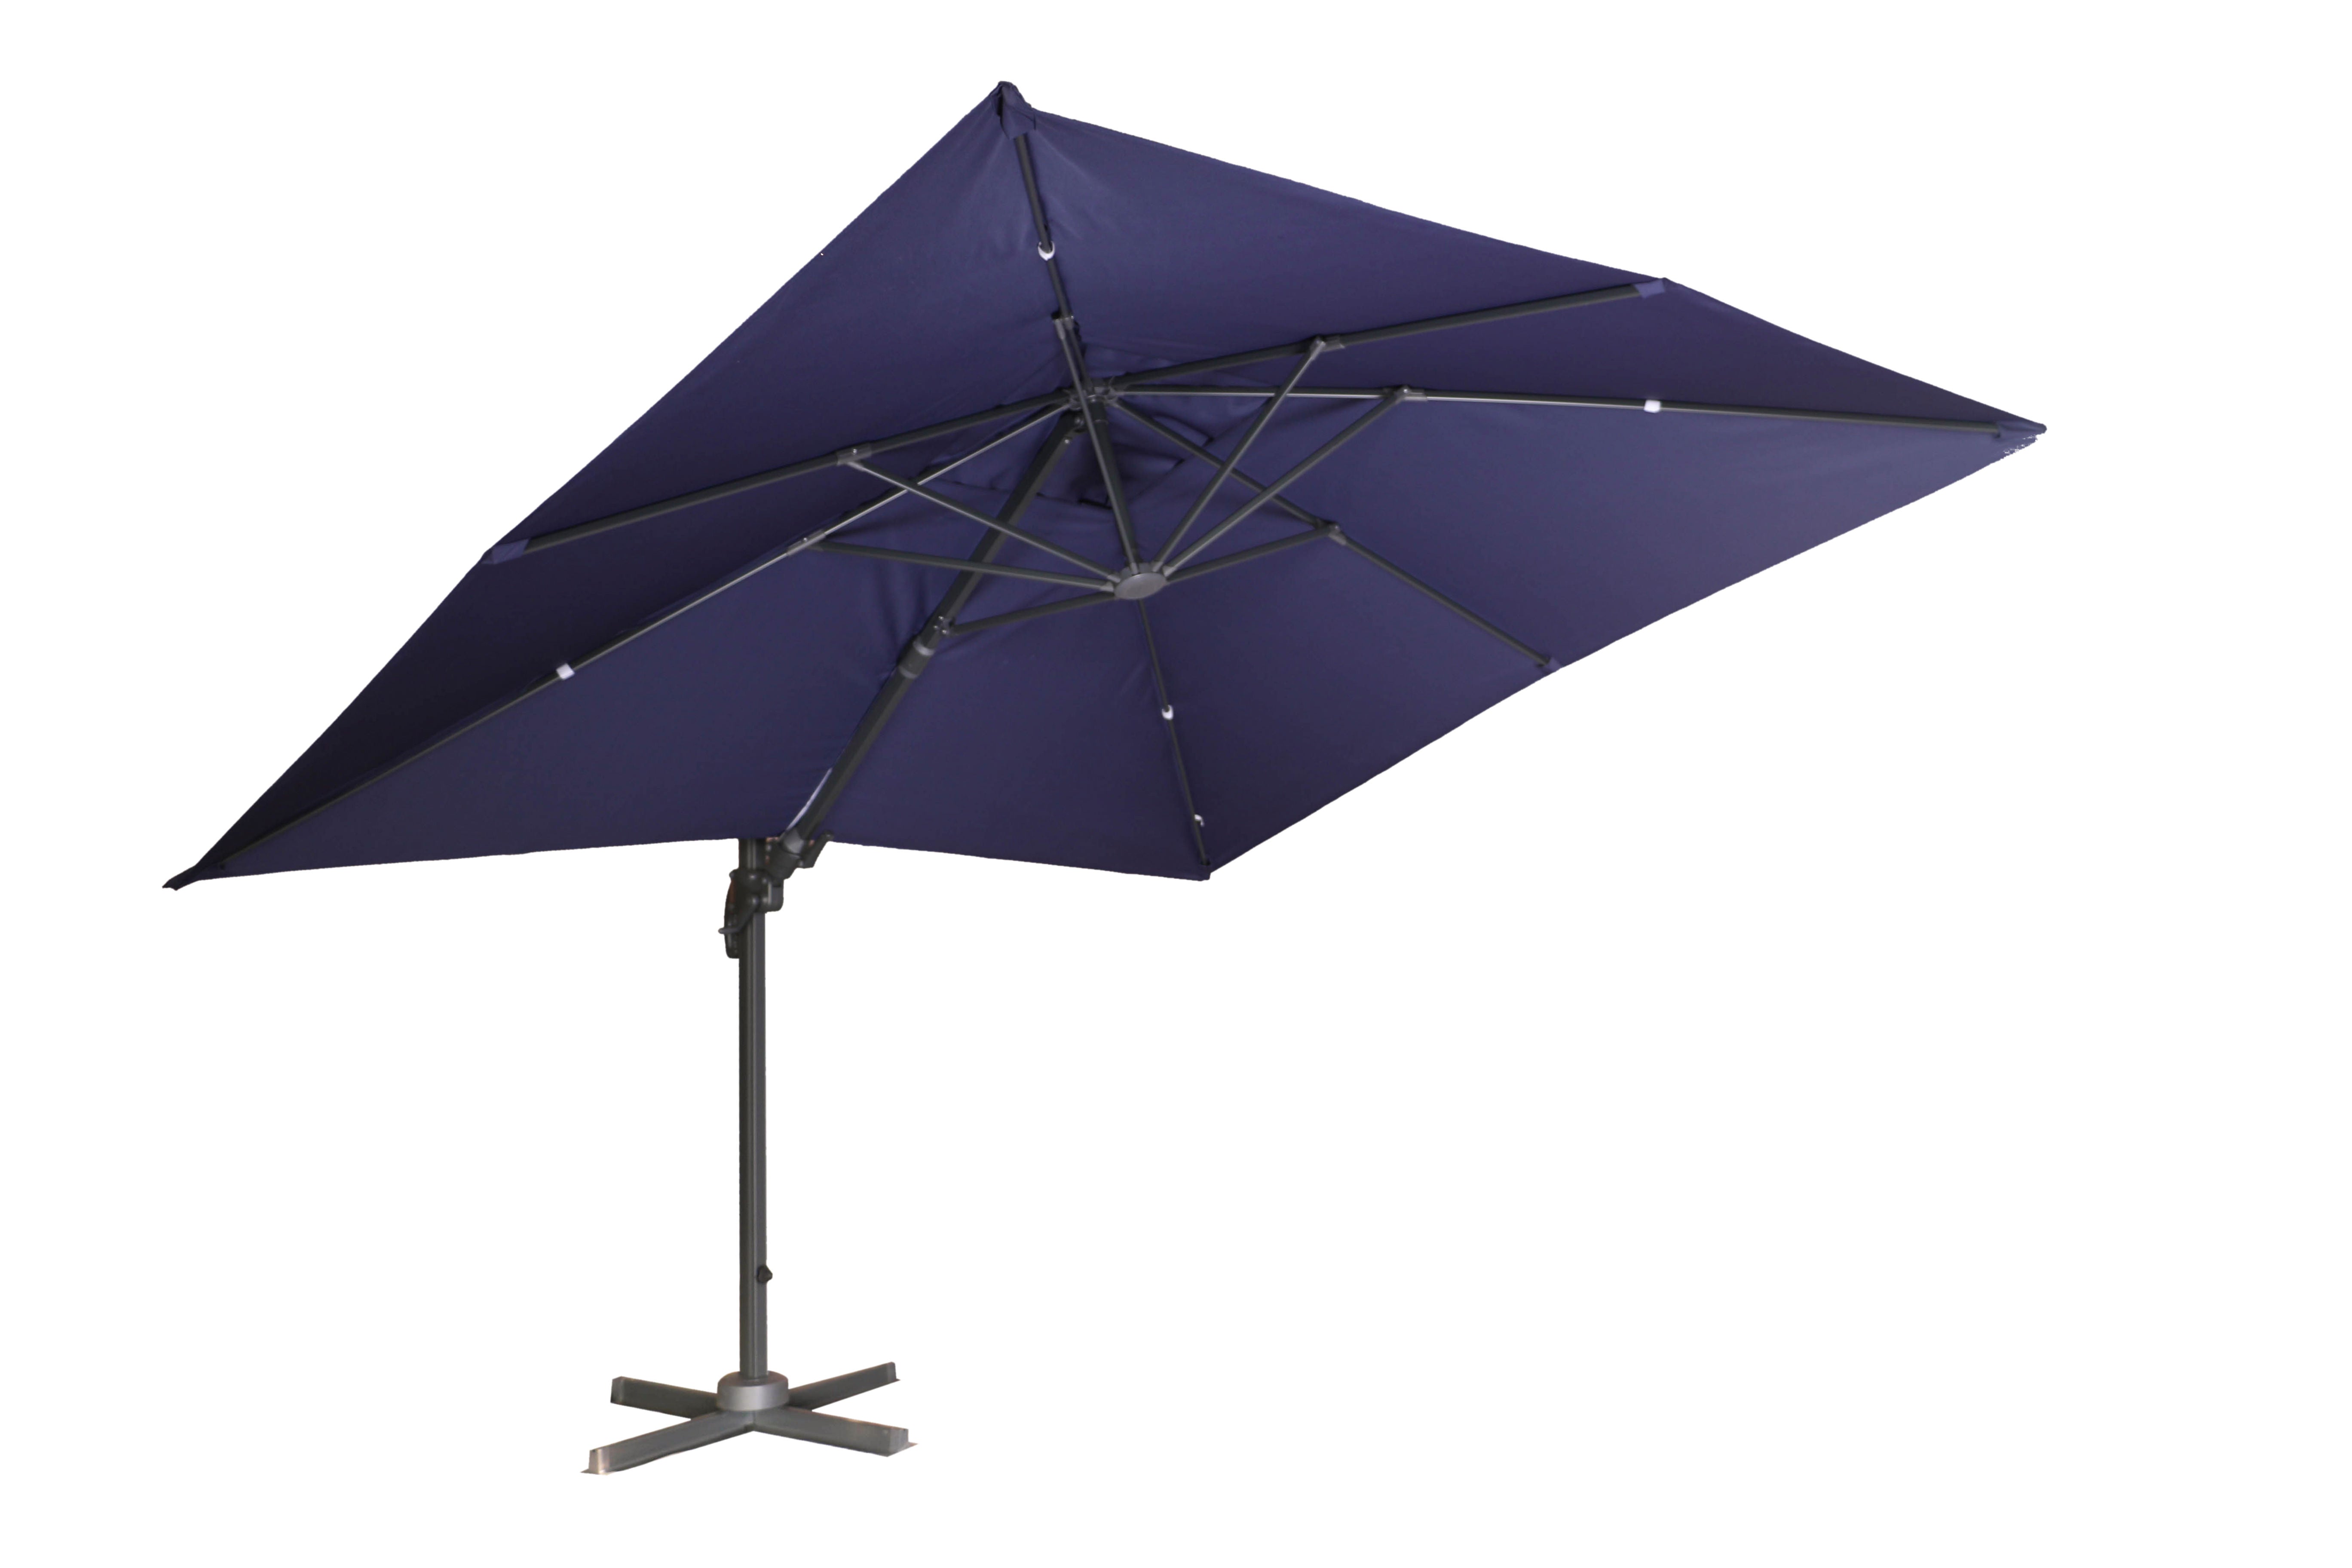 PatioZone 11' Tilting Rotating Luxury Offset Umbrella (Cover Incl.) in UV-Protected Polyester (MOSS-T1203NB) - Nautical Blue